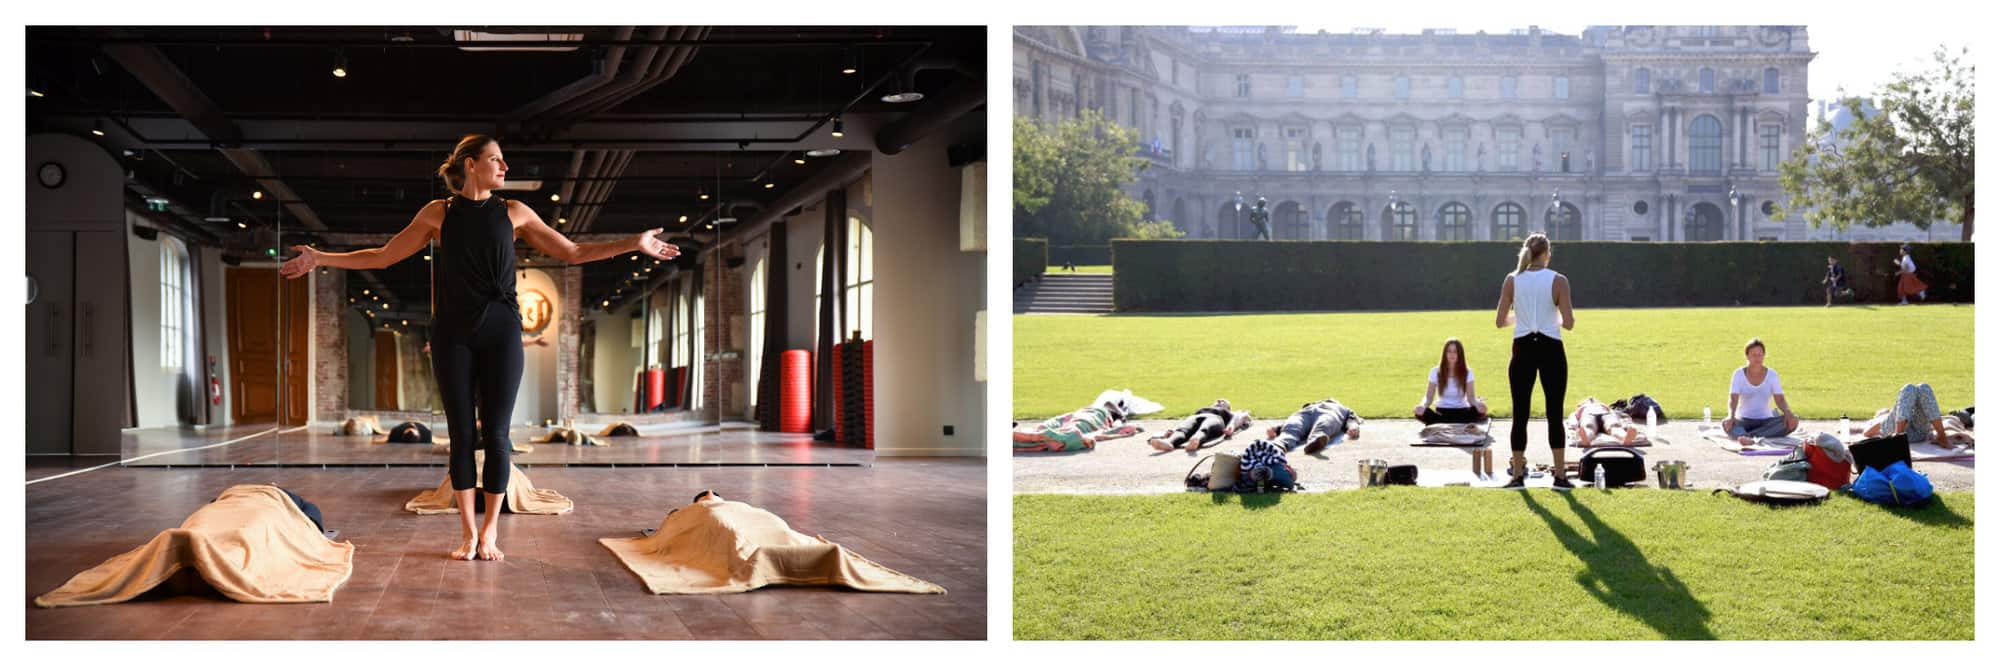 Left: A yoga class with 3 participants lying down and their teacher in the middle spreading out her arms. Right: An outdoor yoga class in front of the Tuilleries Garden with 7 participants and their teacher.